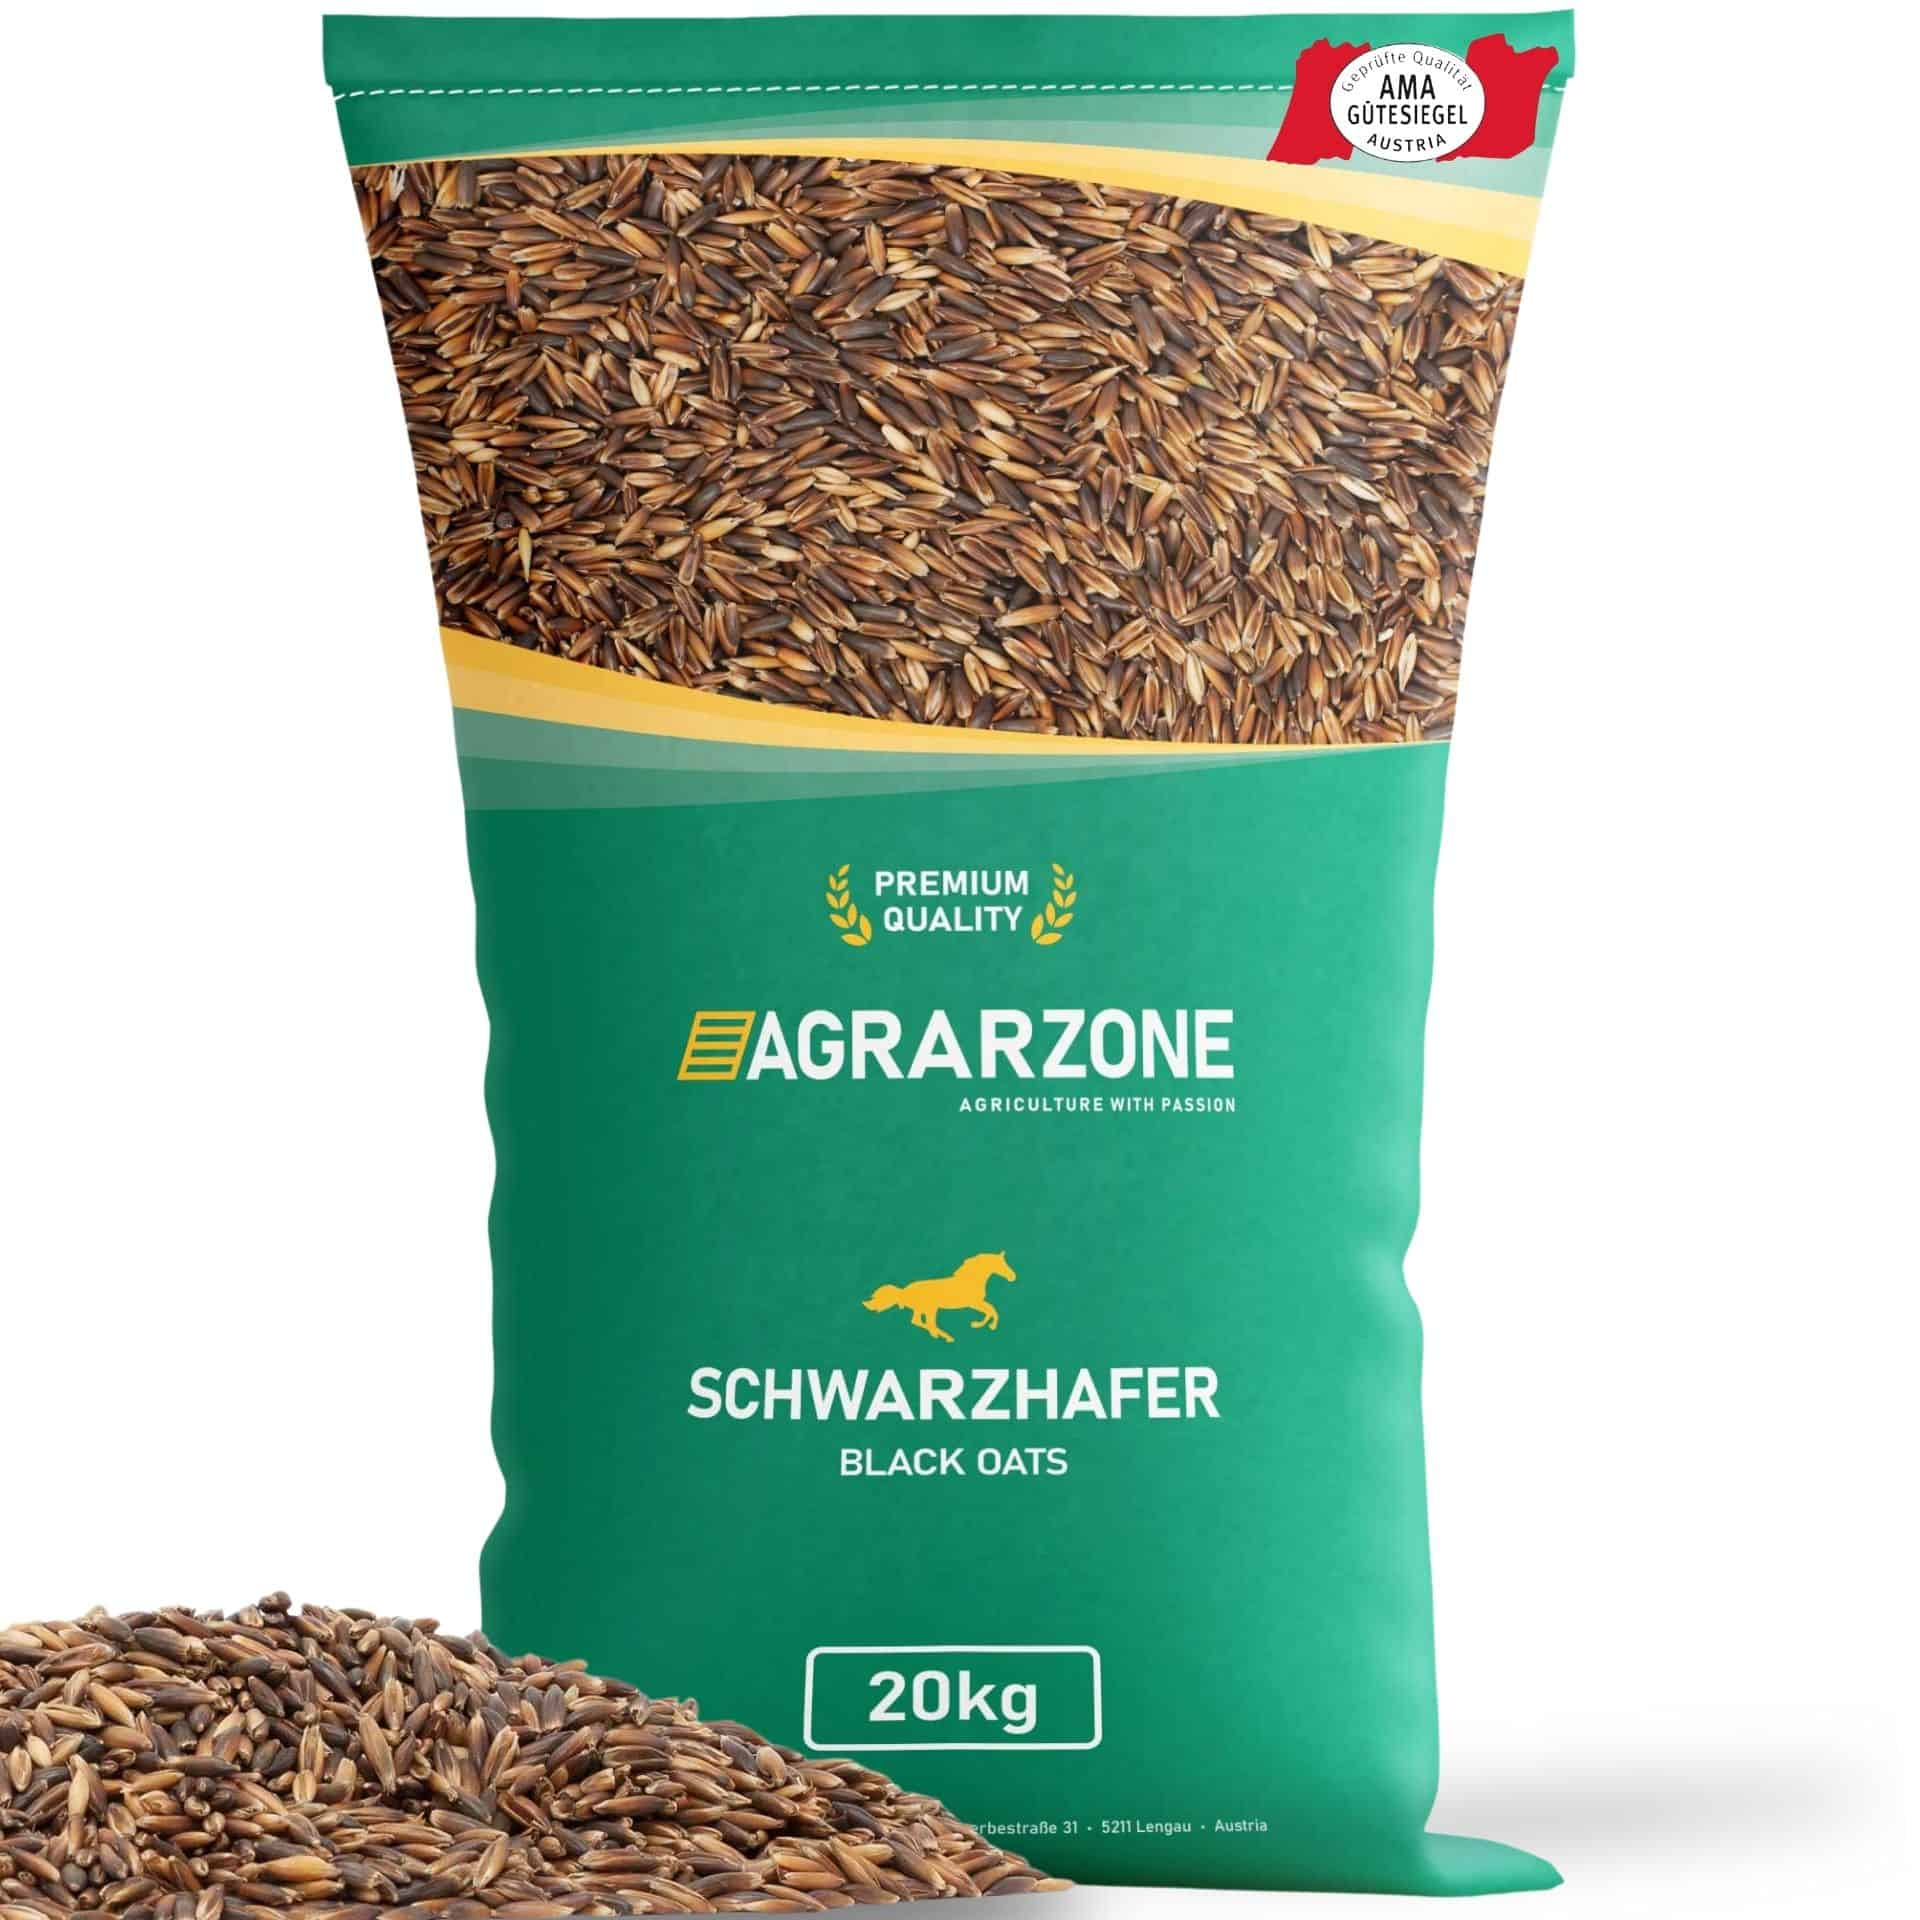 Agrarzone Black Oats cleaned/dust-free 20 kg